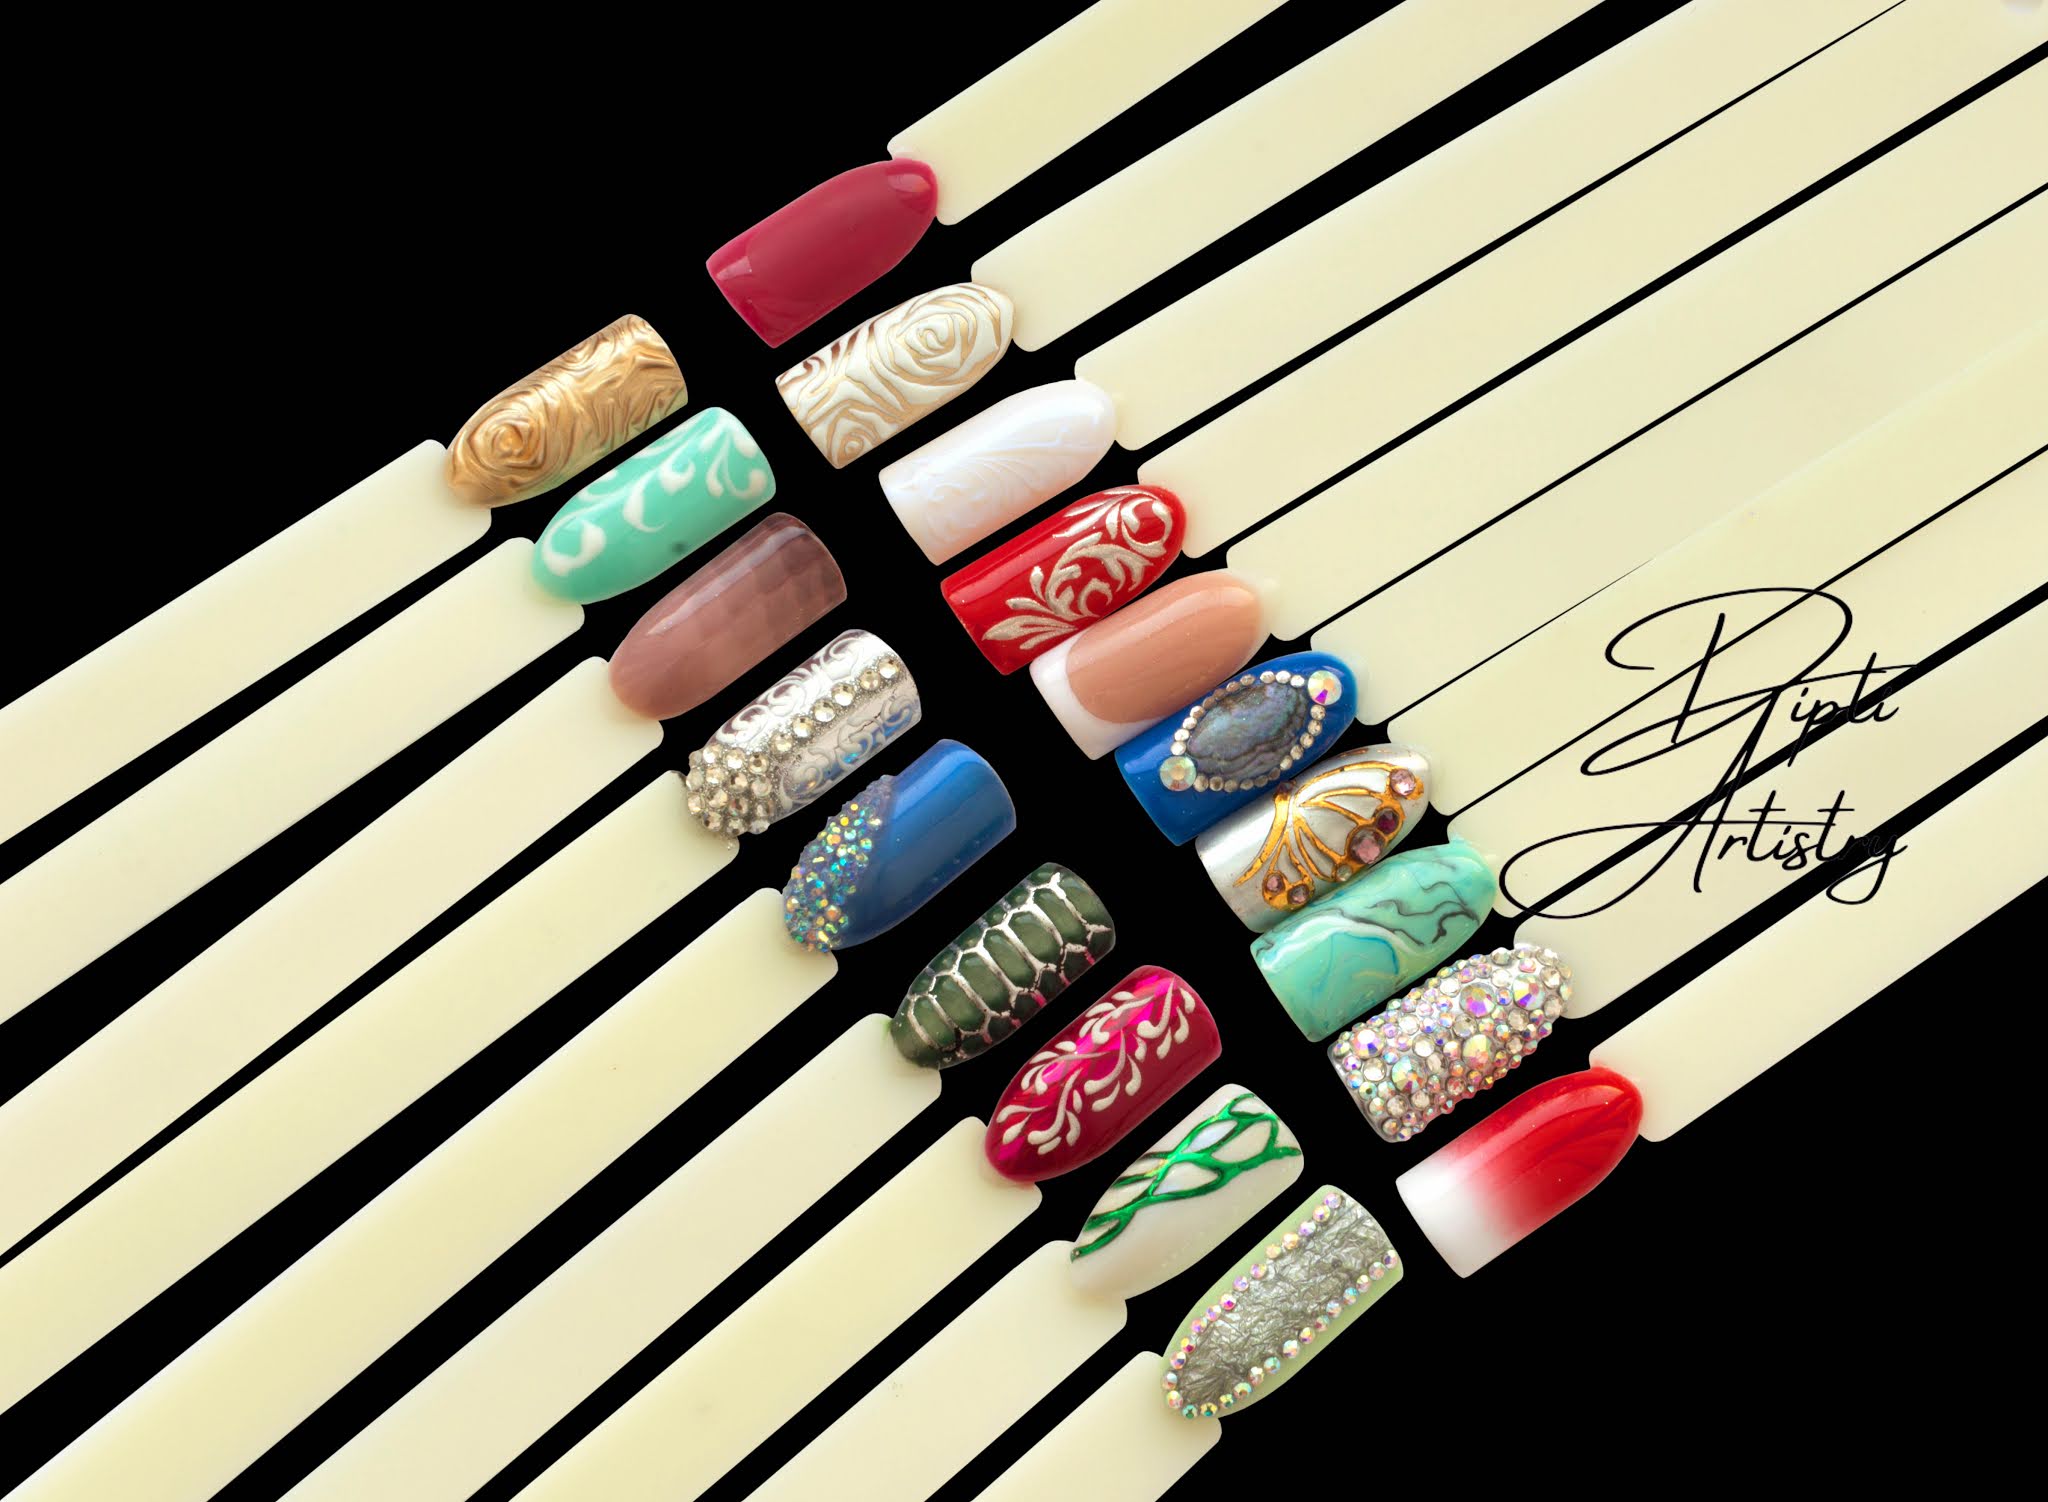 2. Nail Artistry - wide 1